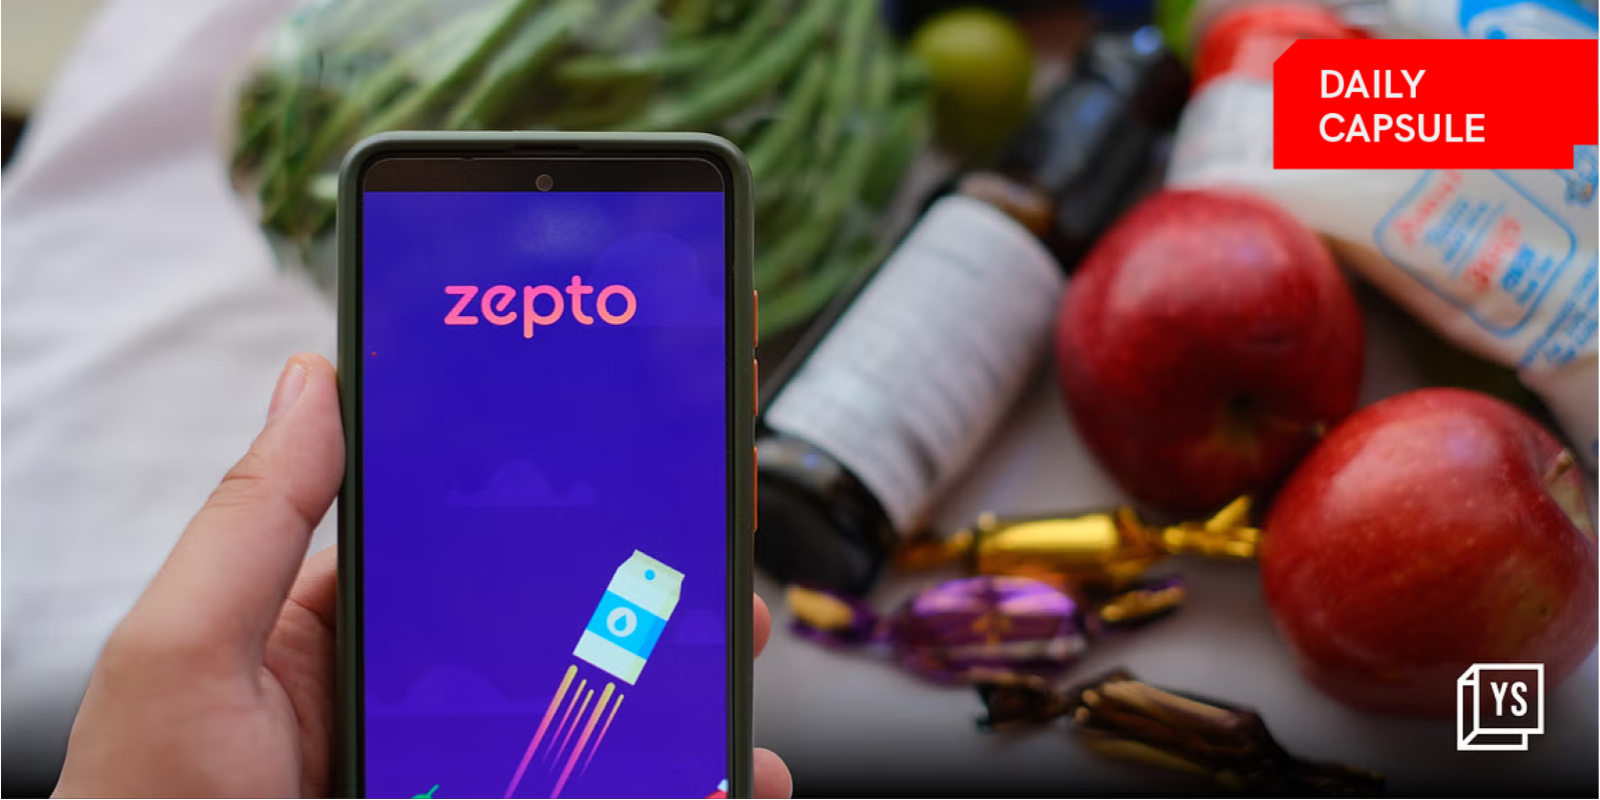 Zepto becomes 2023’s first unicorn; Swiggy to go for IPO in 2024